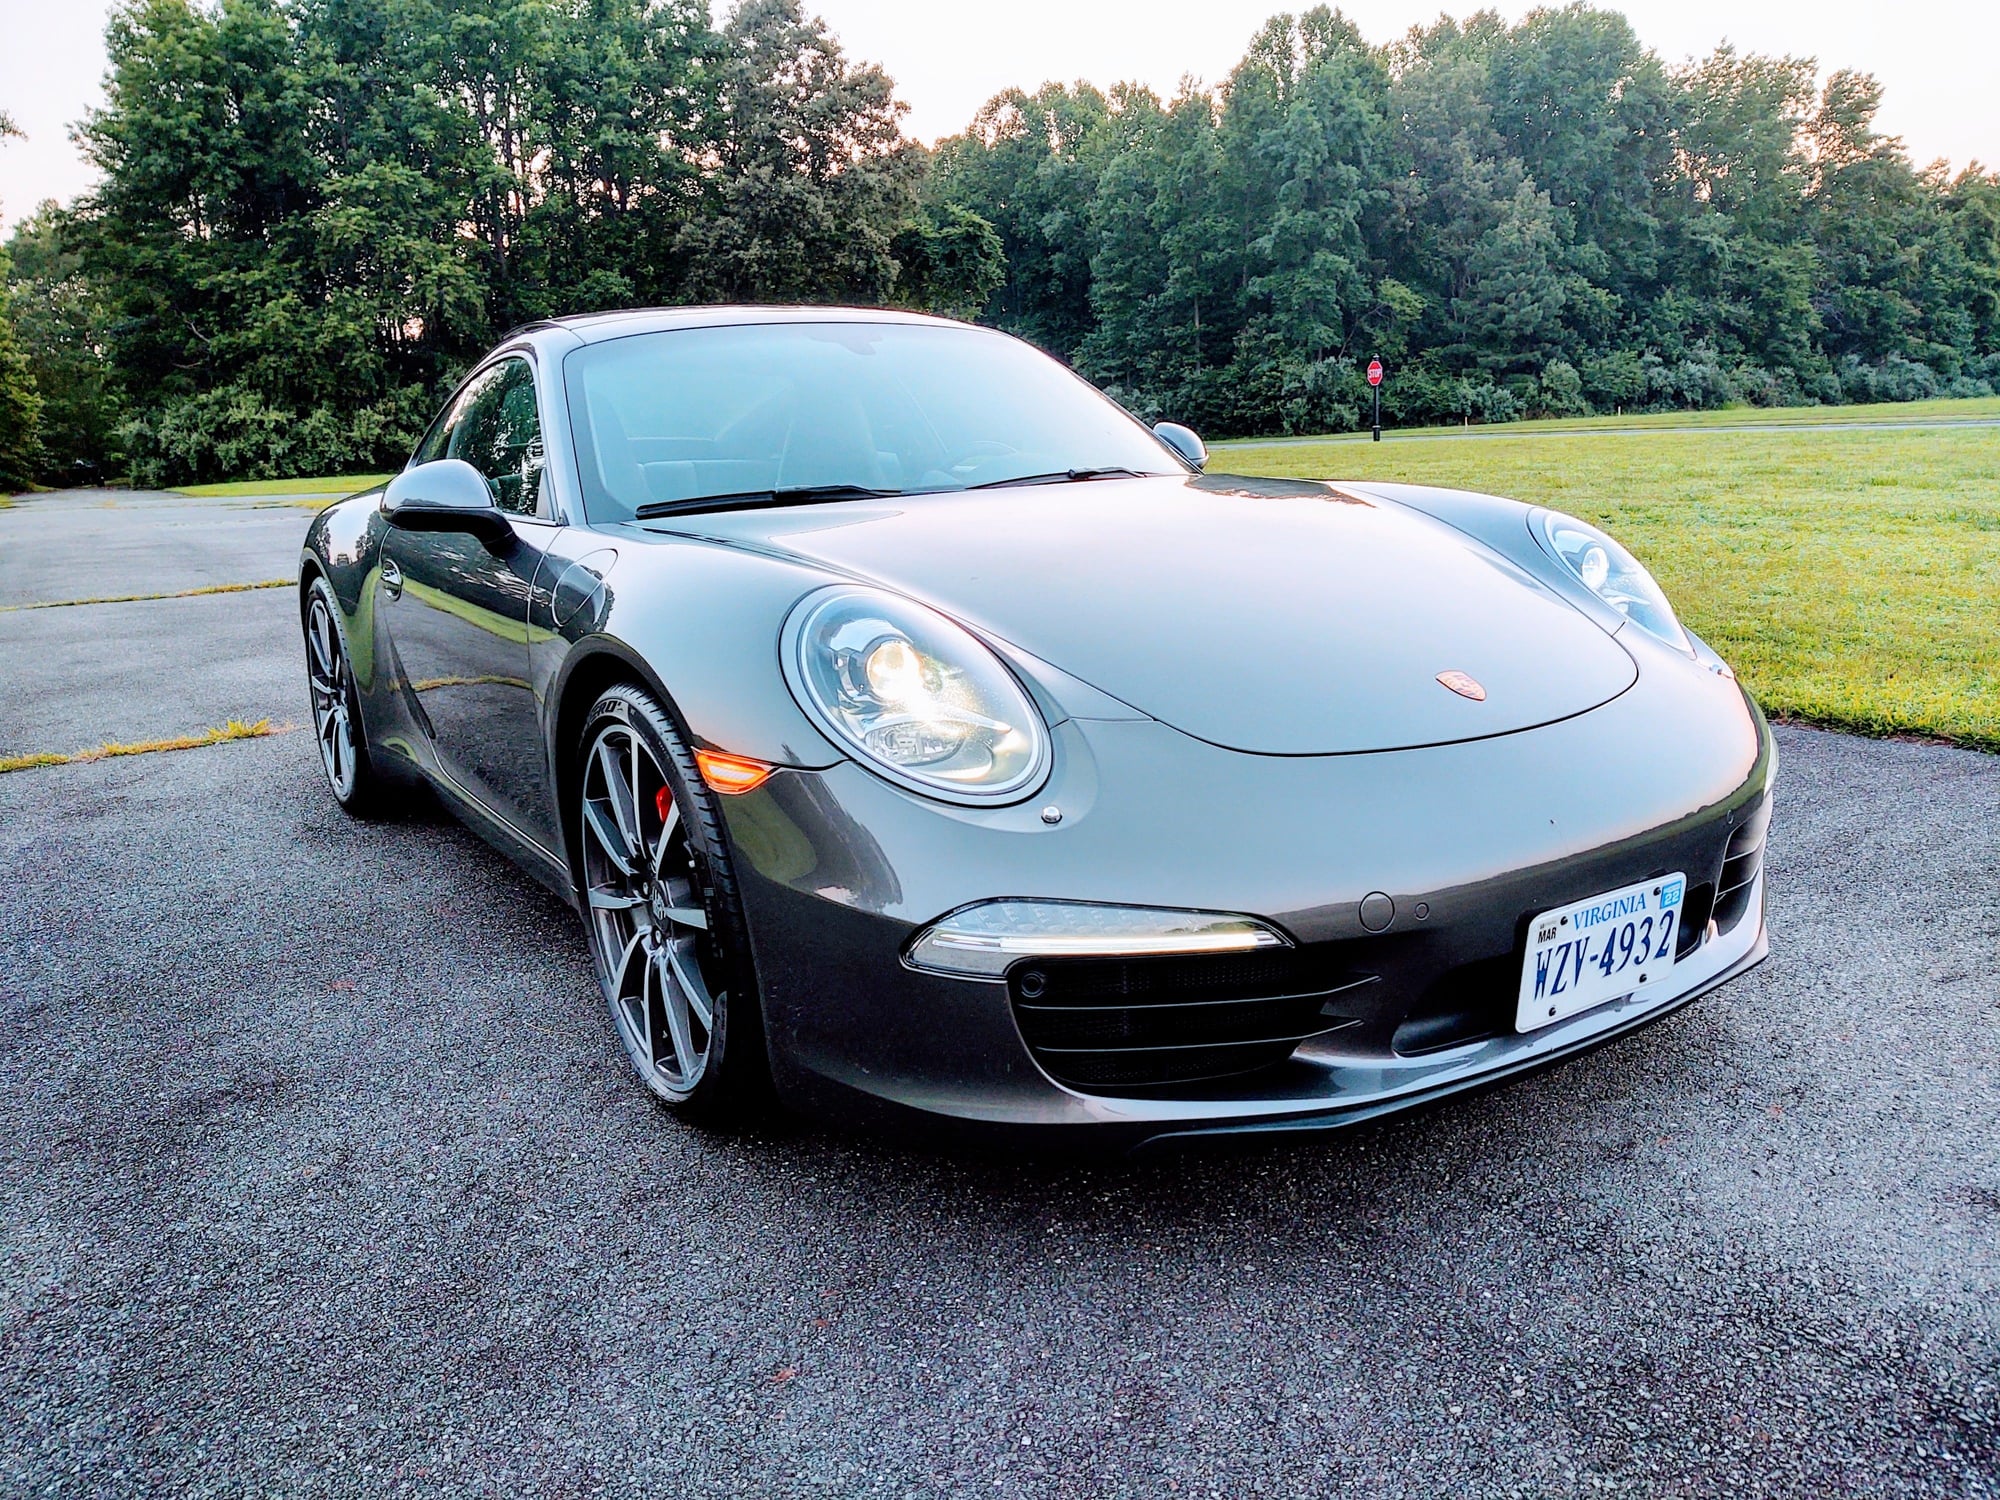 2013 Porsche 911 - 2013 Porsche 991 C2S 7MT CPO - Used - VIN WP0AB2A91DS120939 - 29,600 Miles - 6 cyl - 2WD - Manual - Coupe - Gray - Weems, VA 22576, United States